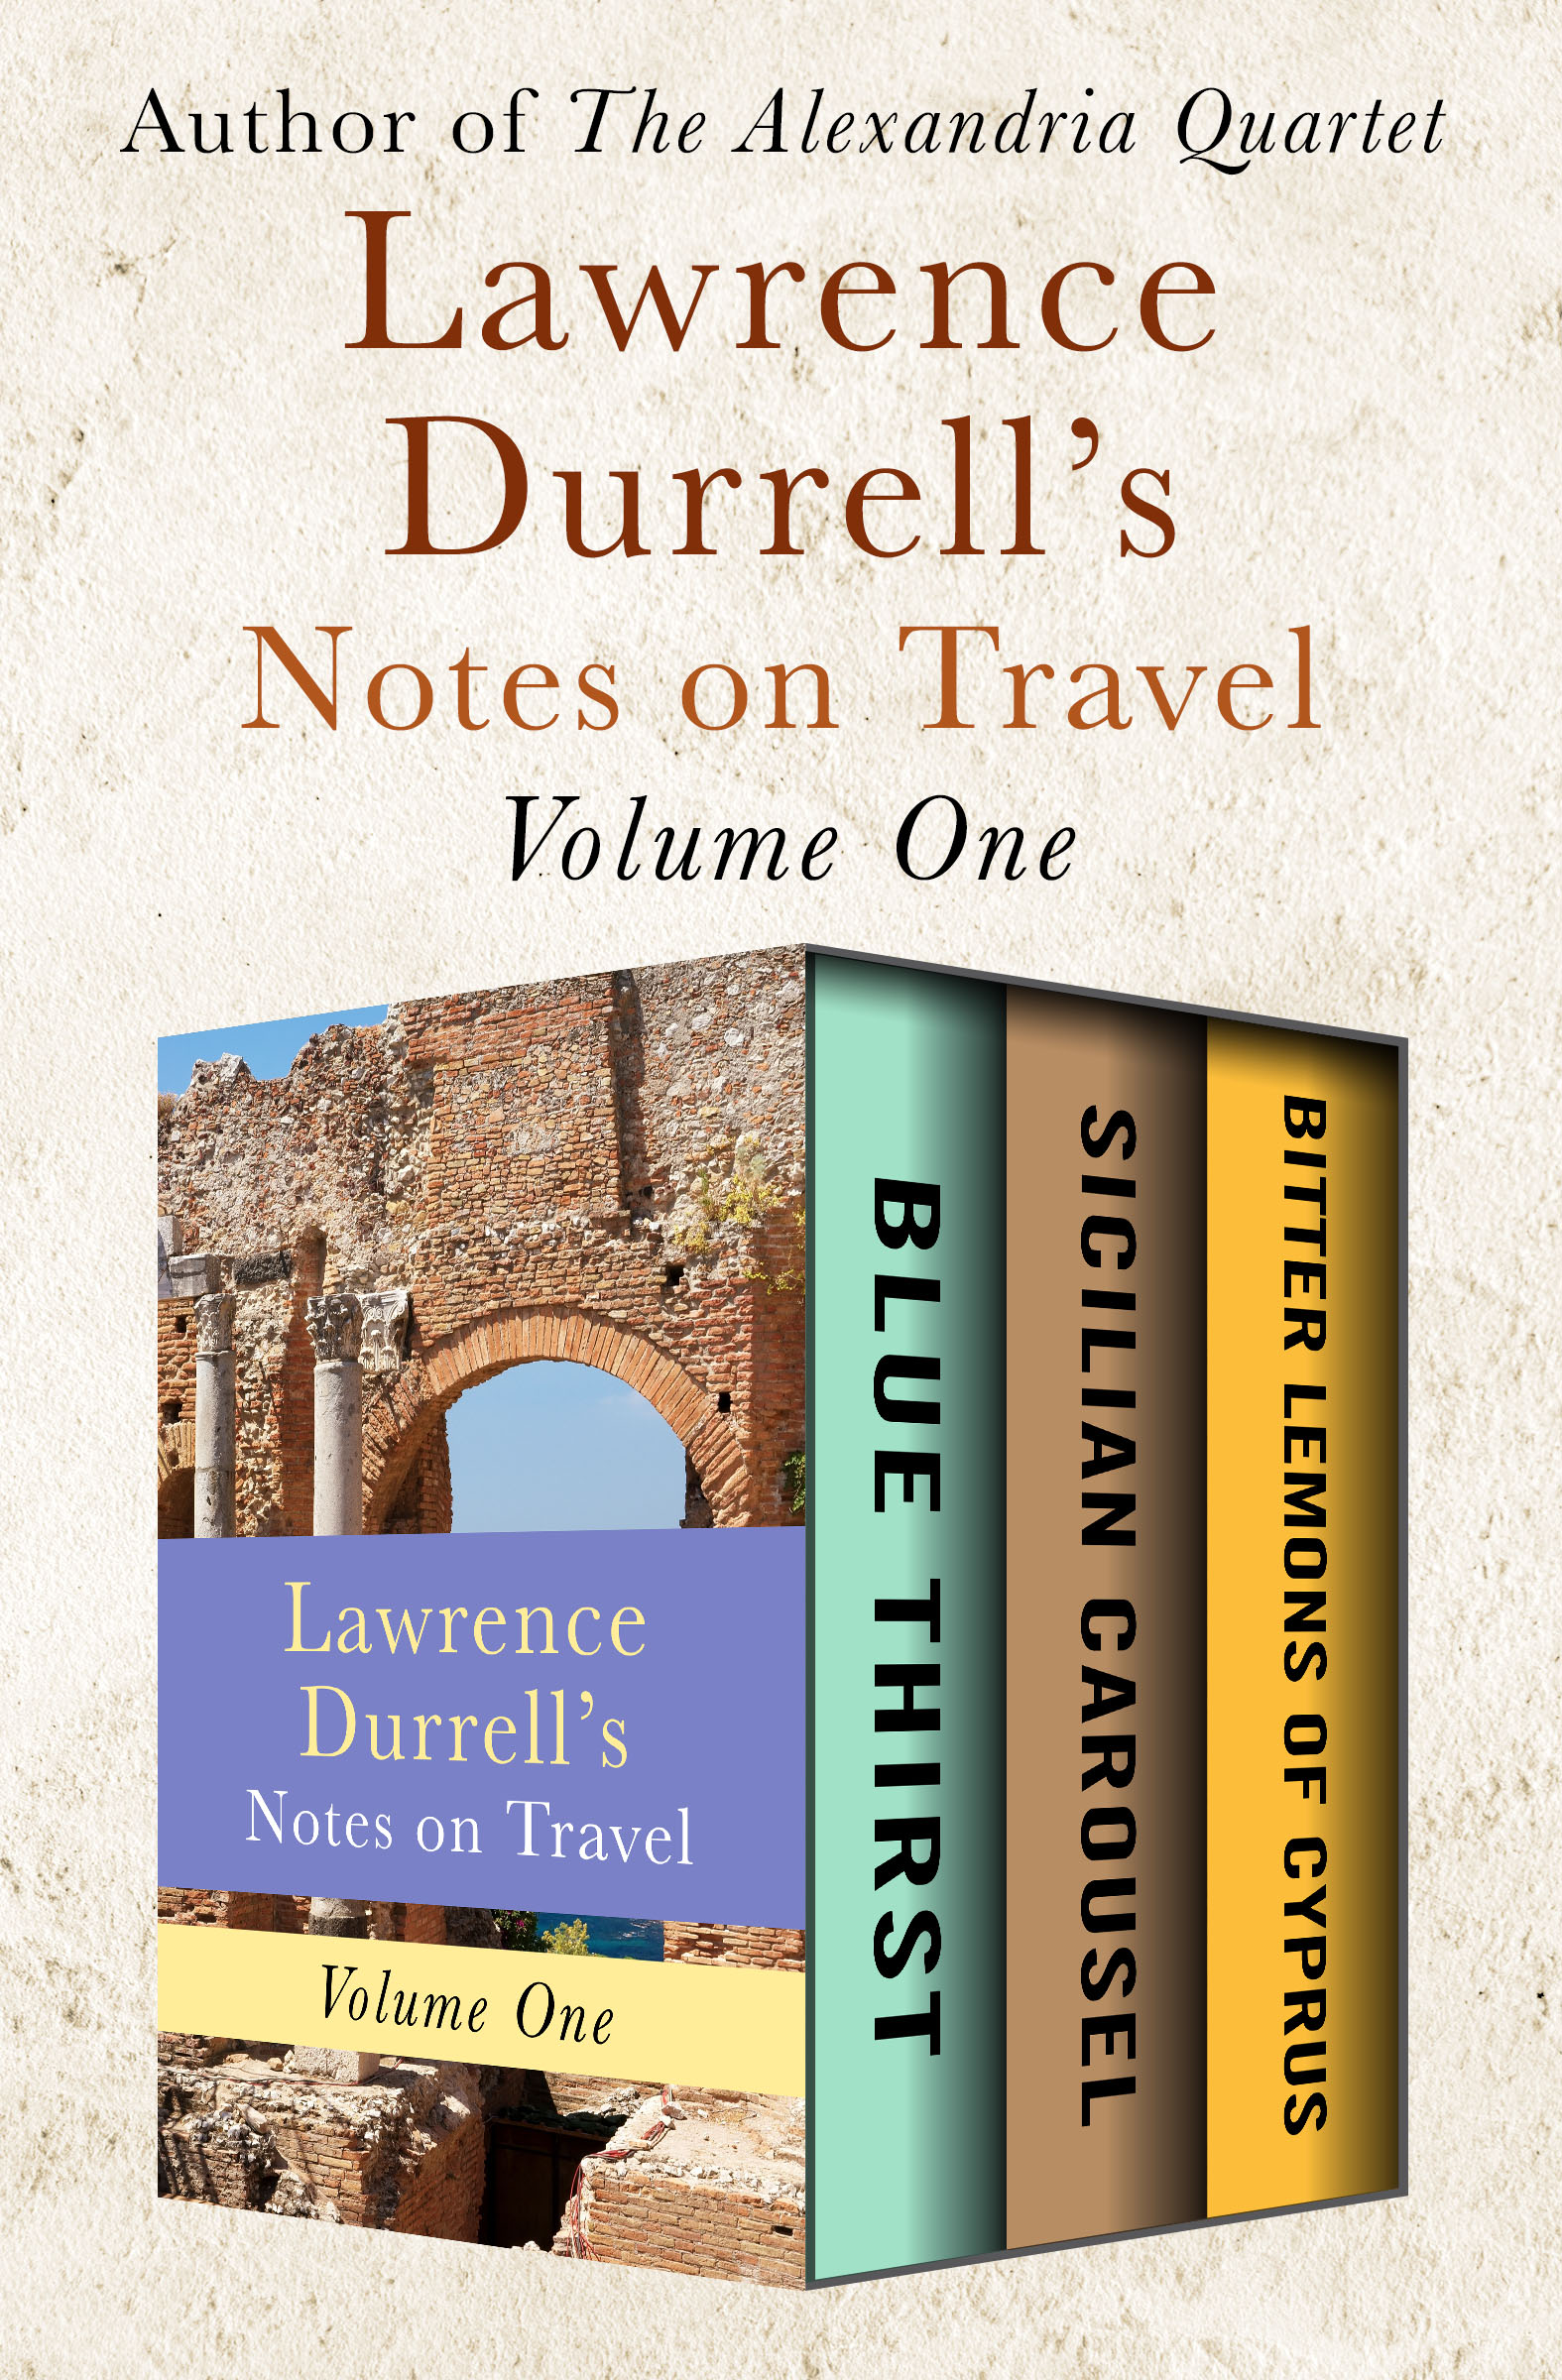 Lawrence Durrells Notes on Travel Volume One Blue Thirst Sicilian Carousel - photo 1